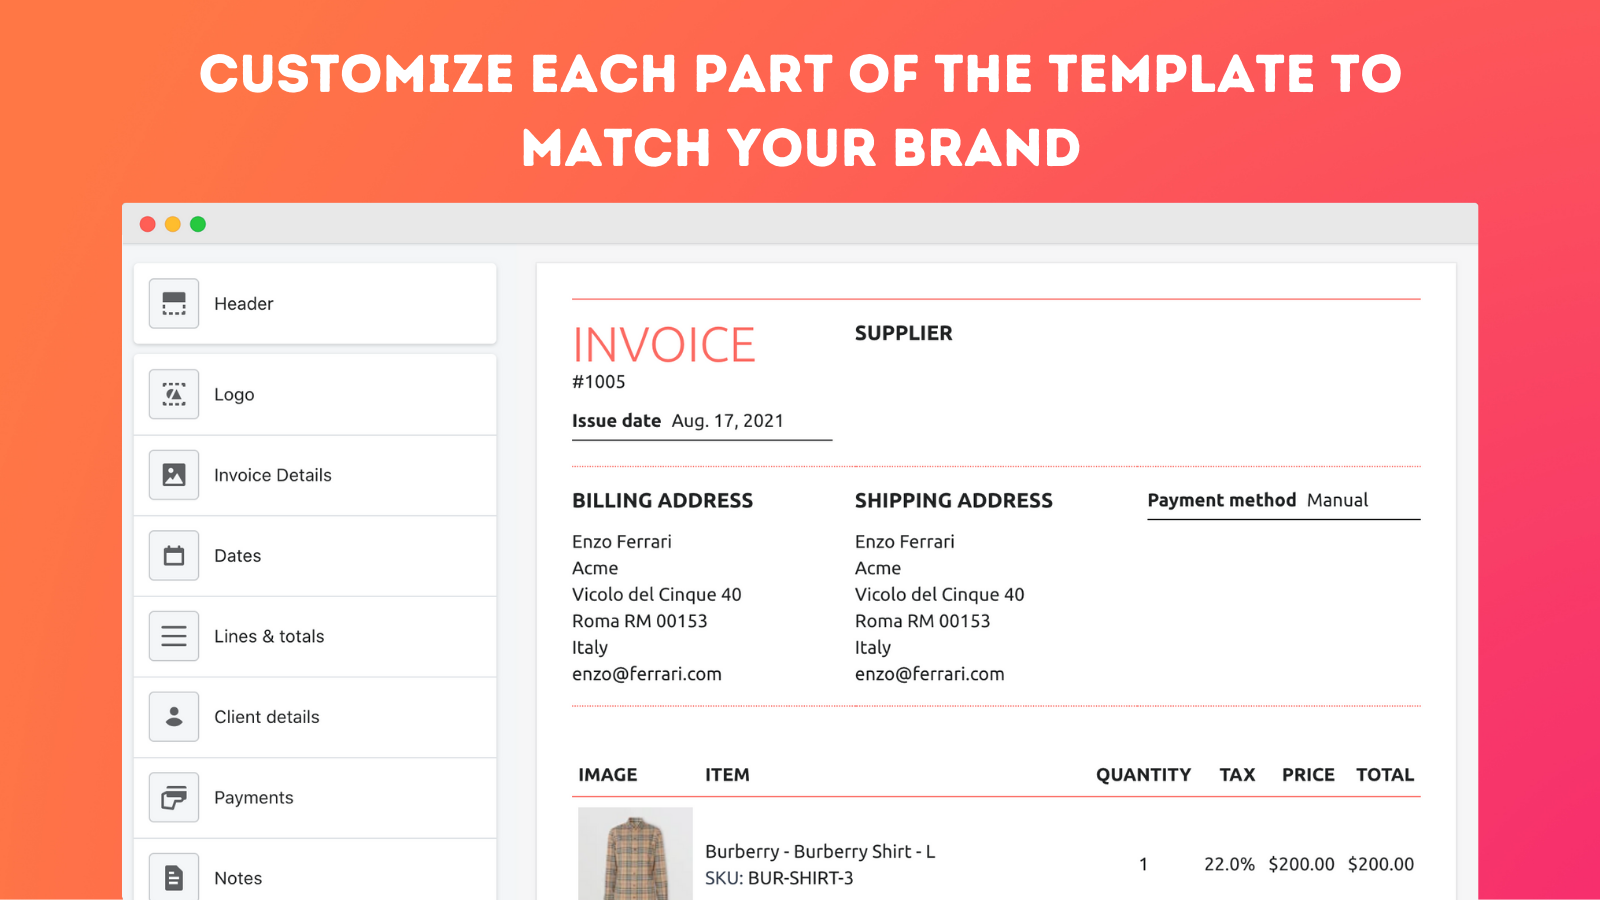 Customize each part of the template to match your brand